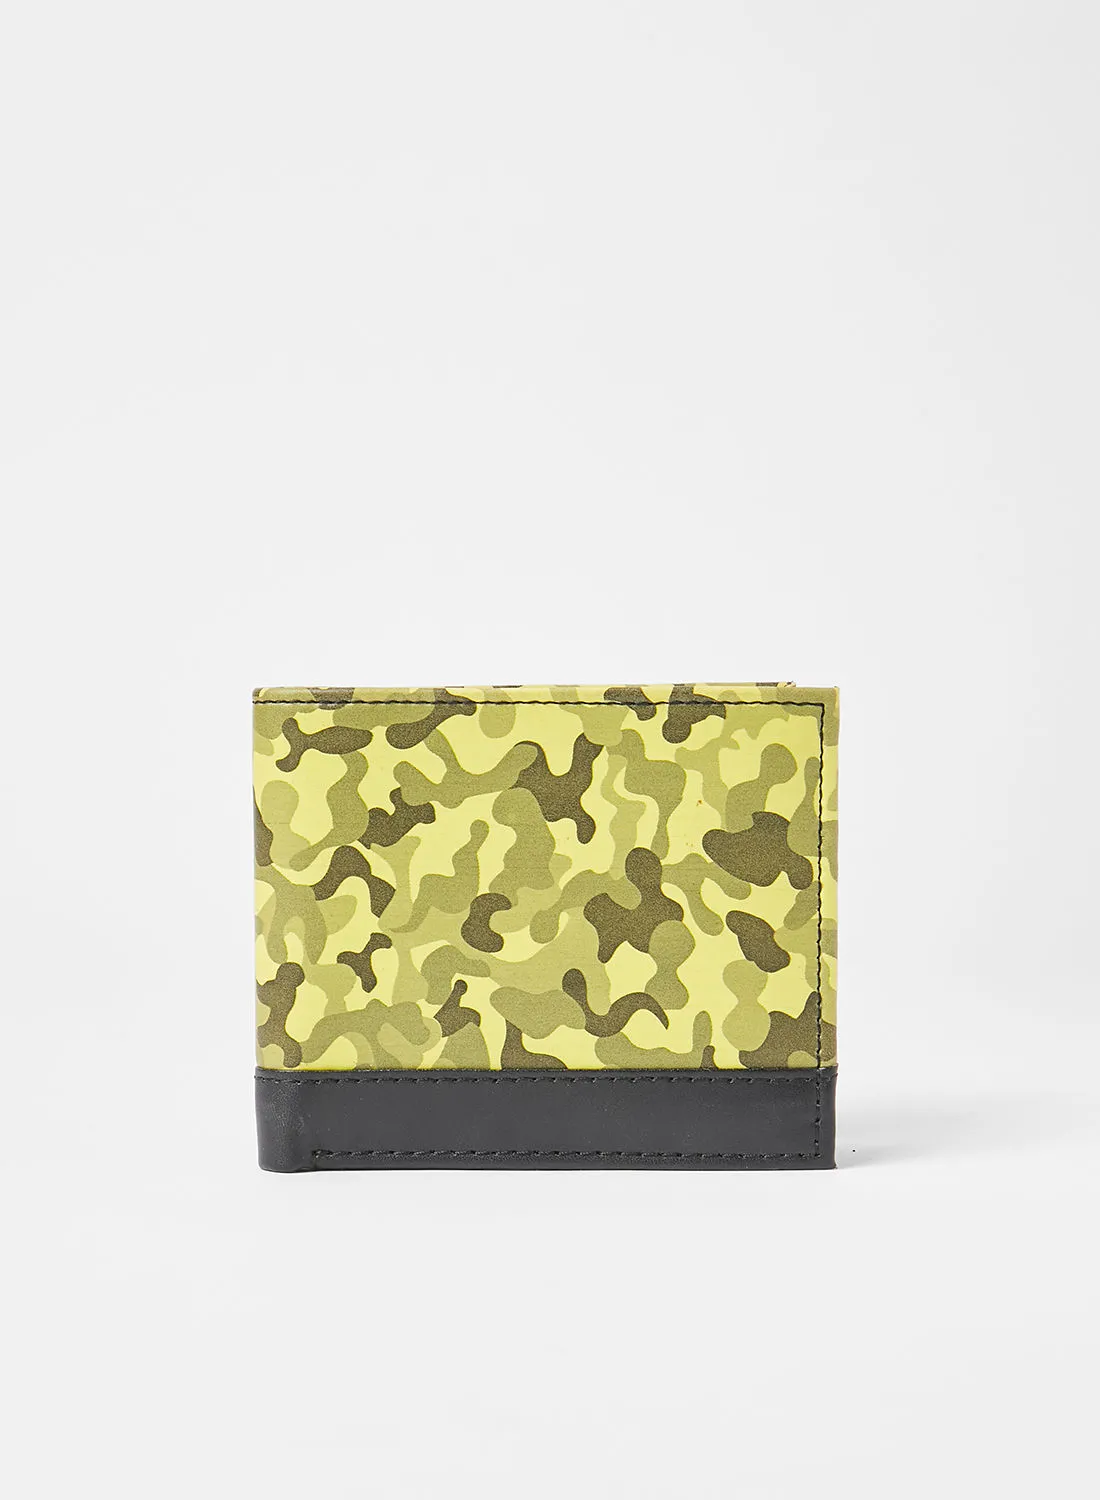 STATE 8 Camo Print Wallet Yellow